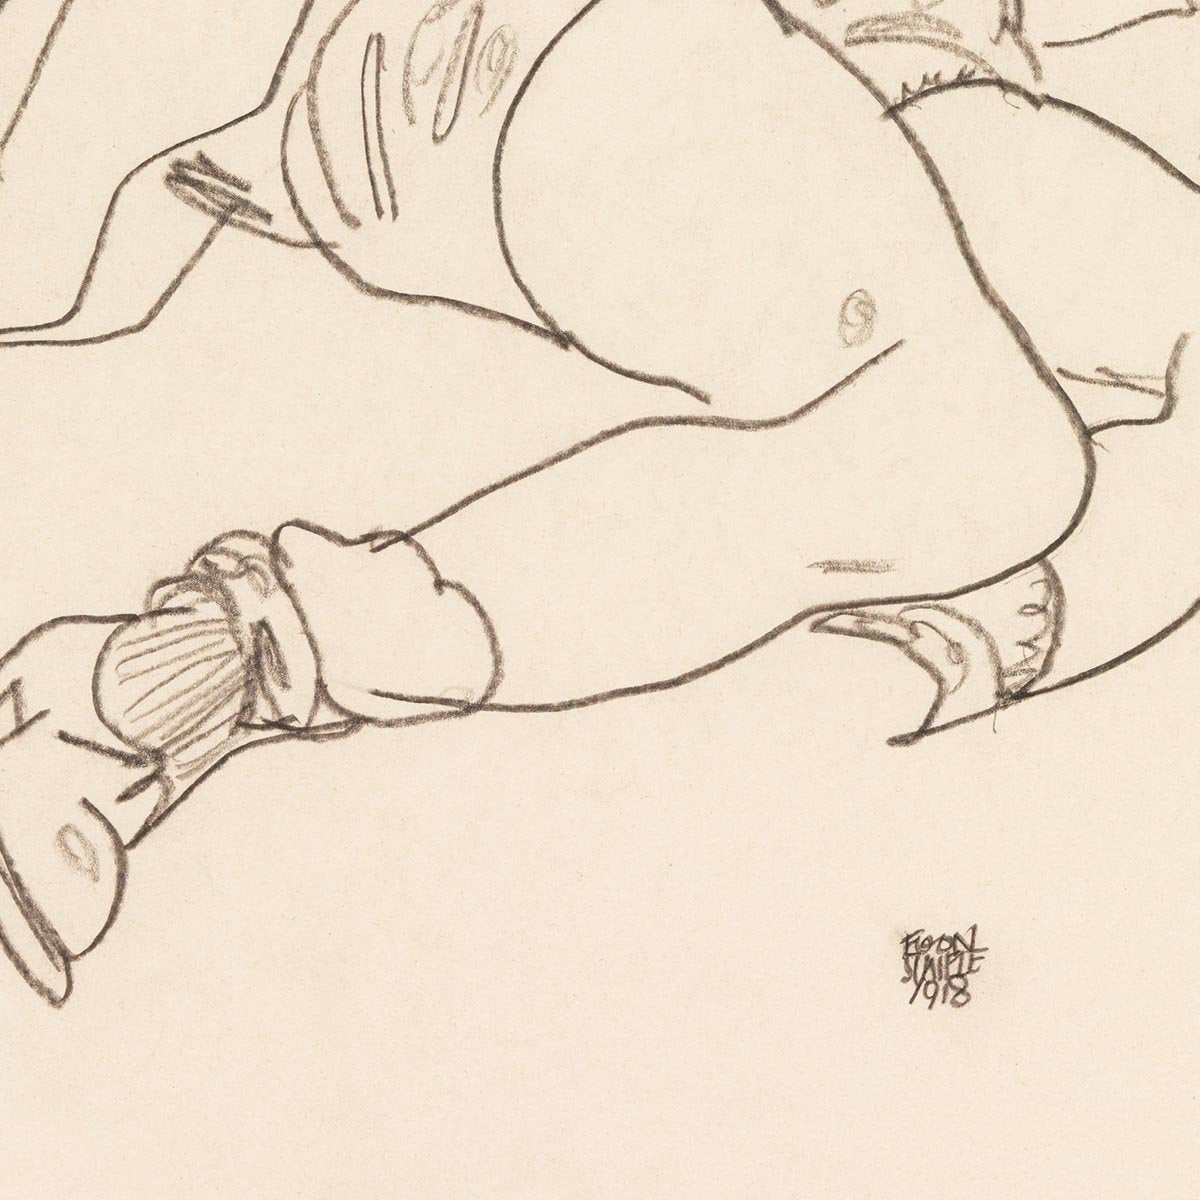 Reclining Woman with Raised Skirt by Egon Schiele